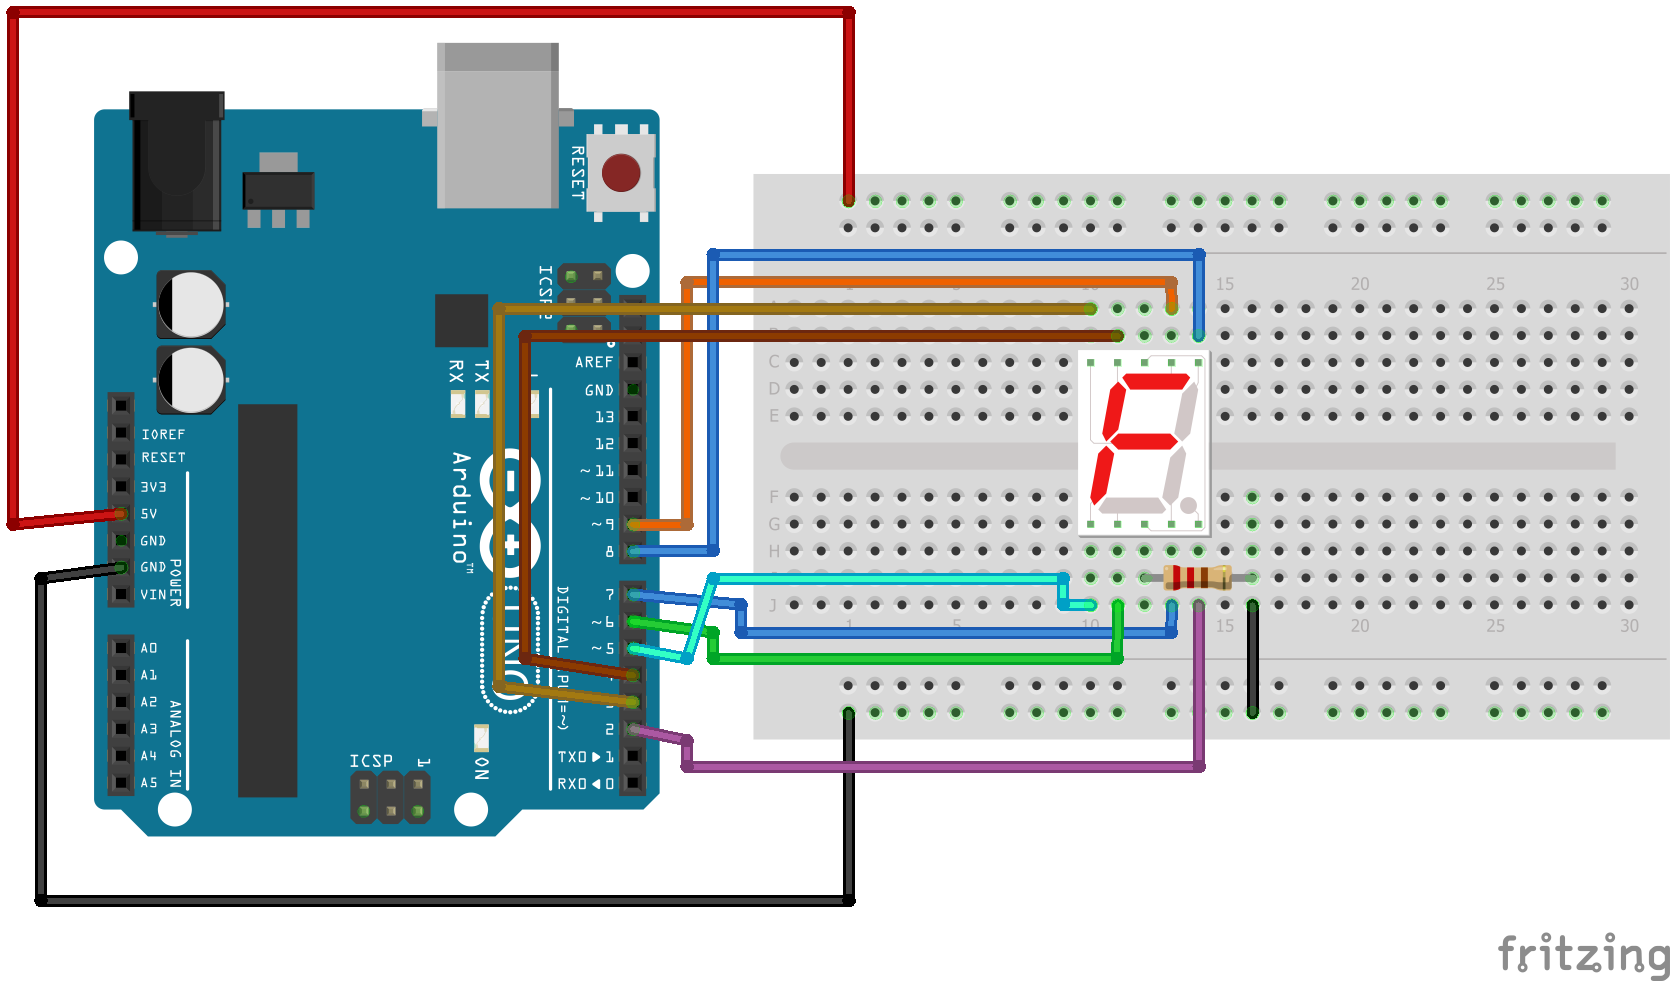 Simulate_Arduino_Project_AK_MP_image13.png